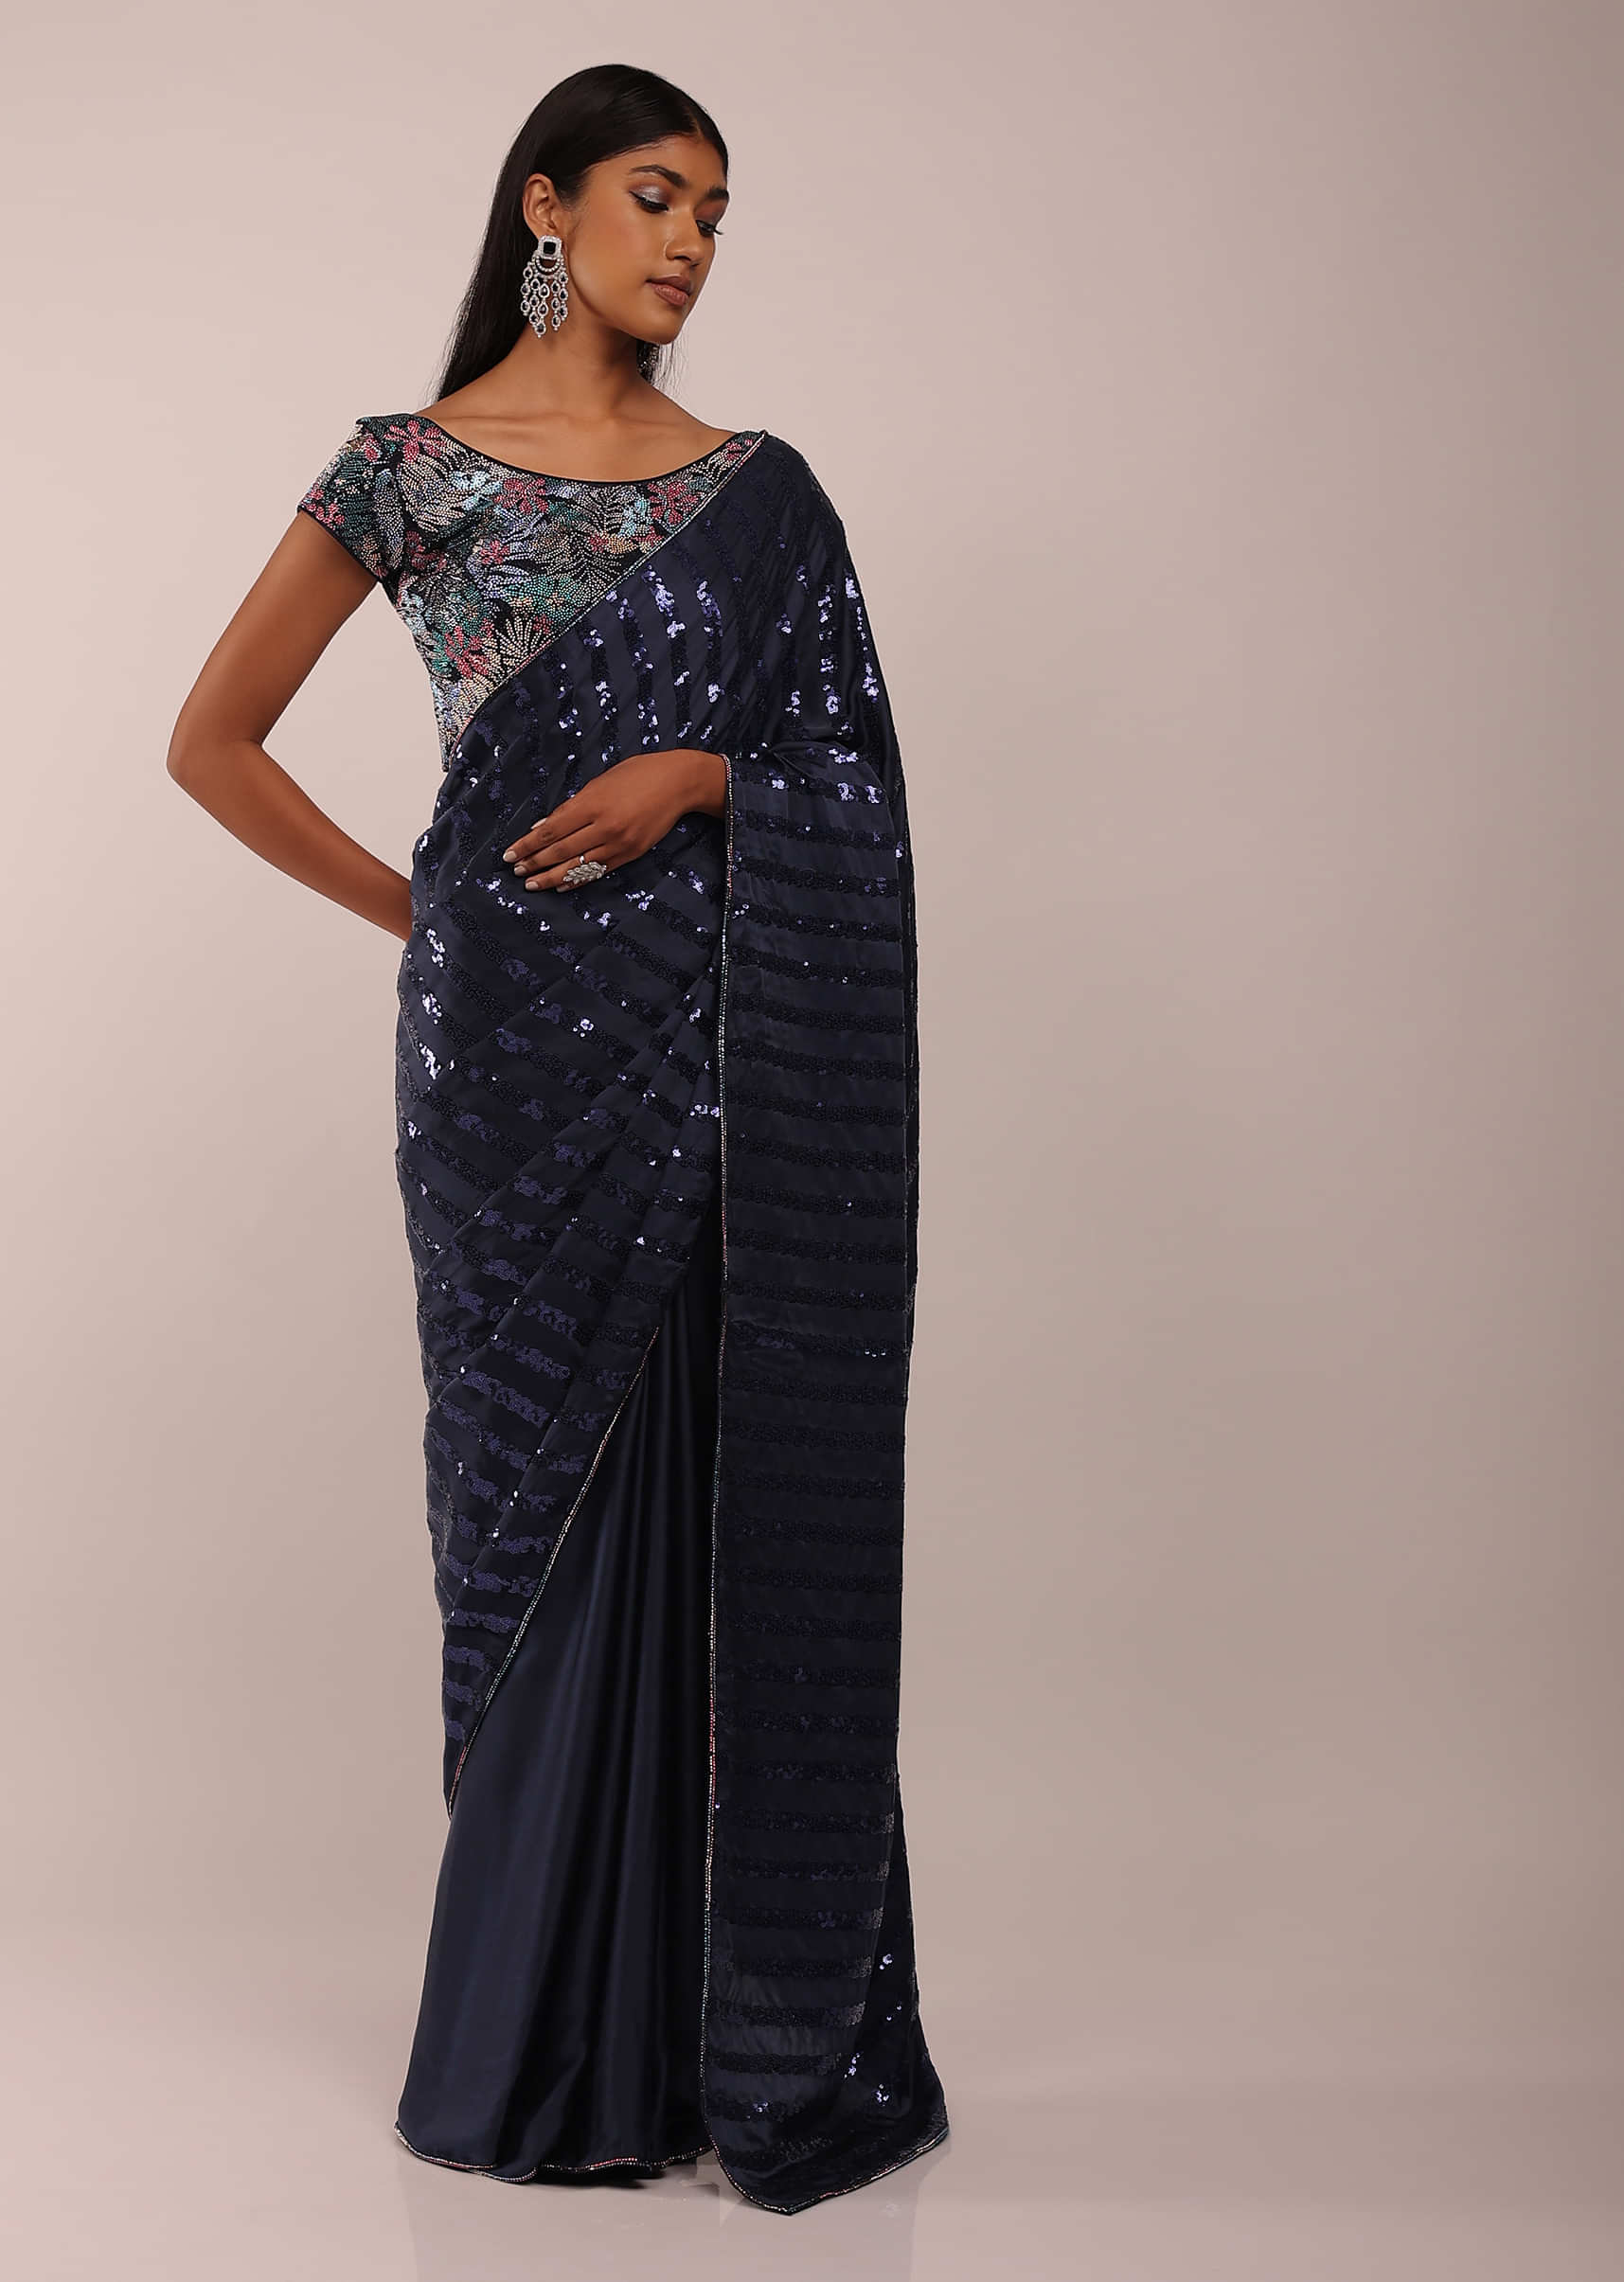 Blue Night Satin Saree In Multi Color Beads Embellishment With Sequins In Thin Striped On The Pallu Border